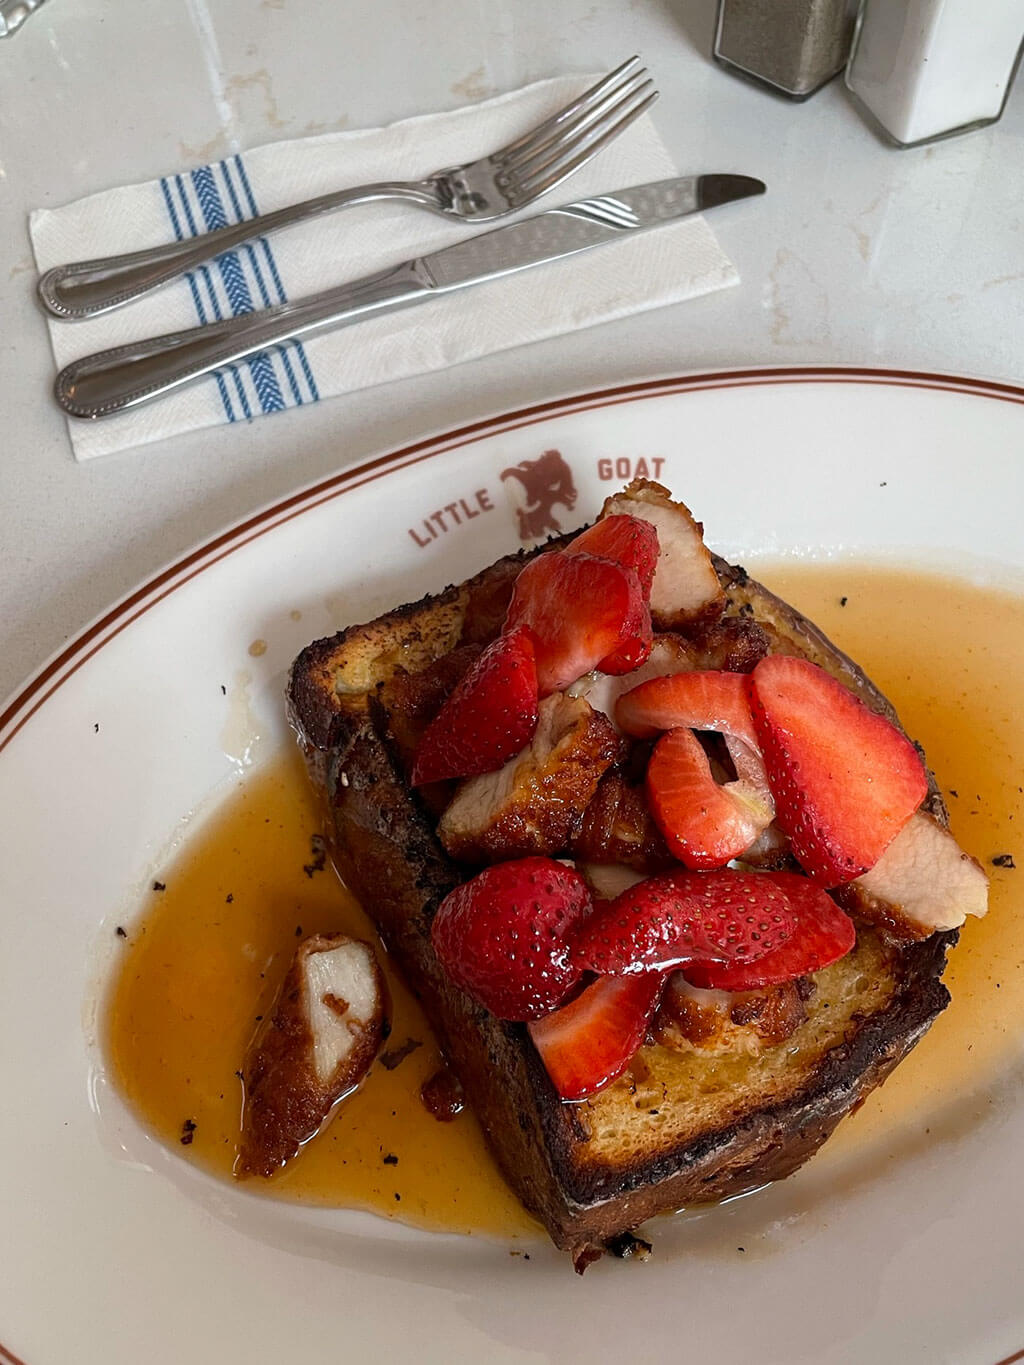 drive-swim-fly-chicago-illinois-little-goat-diner-breakfast-brunch-french-toast-strawberry-fried-chicken